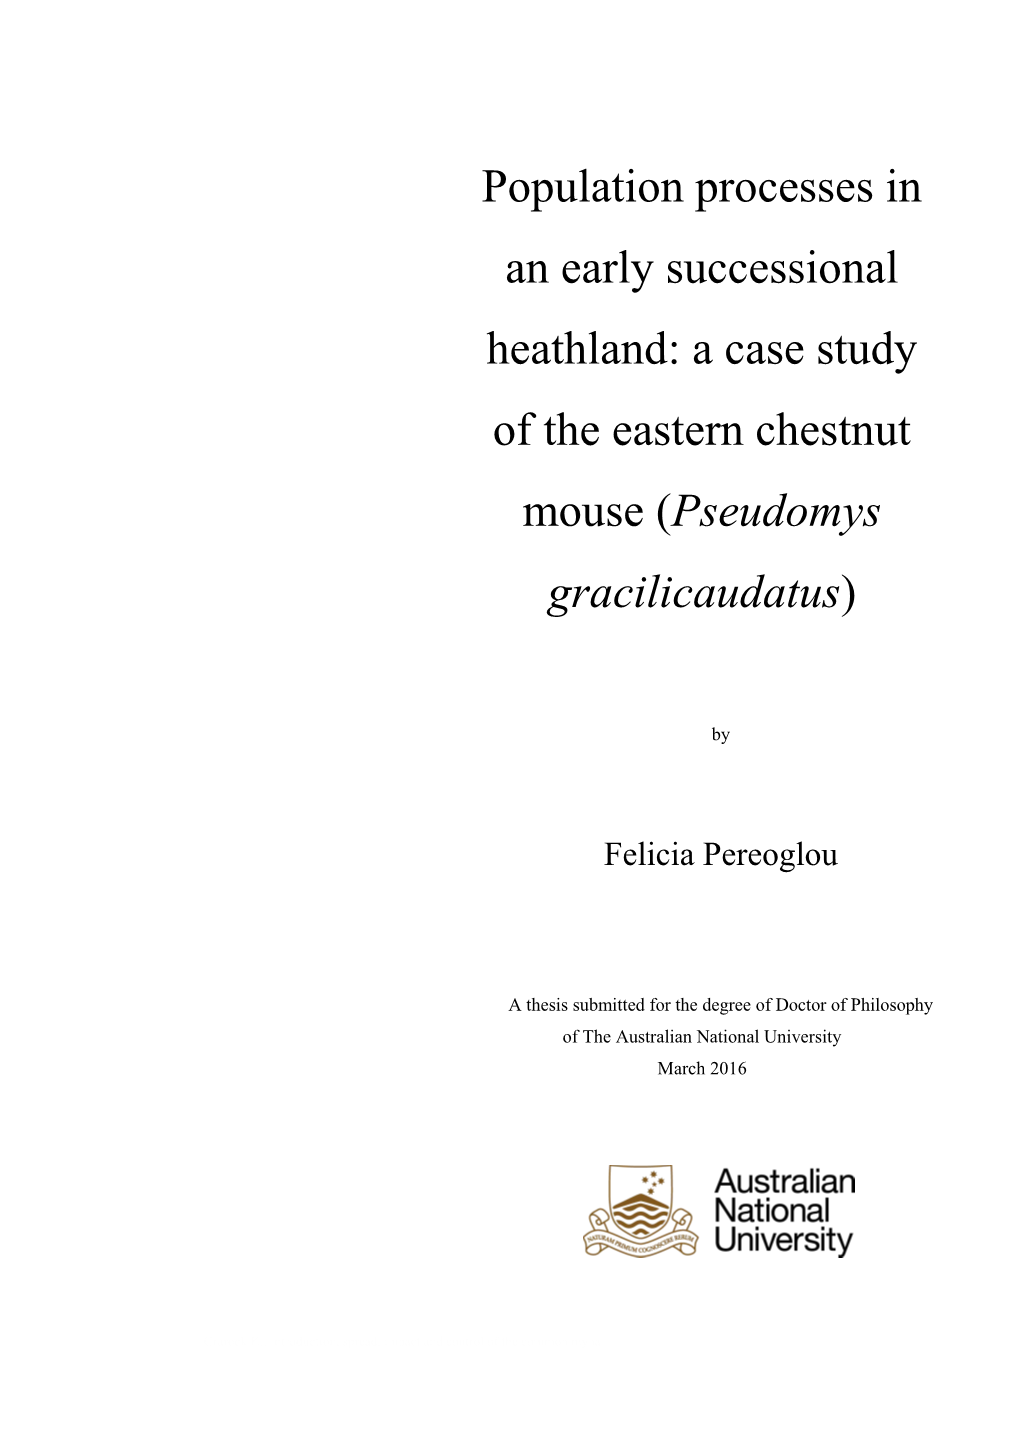 Population Processes in an Early Successional Heathland: a Case Study of the Eastern Chestnut Mouse (Pseudomys Gracilicaudatus)